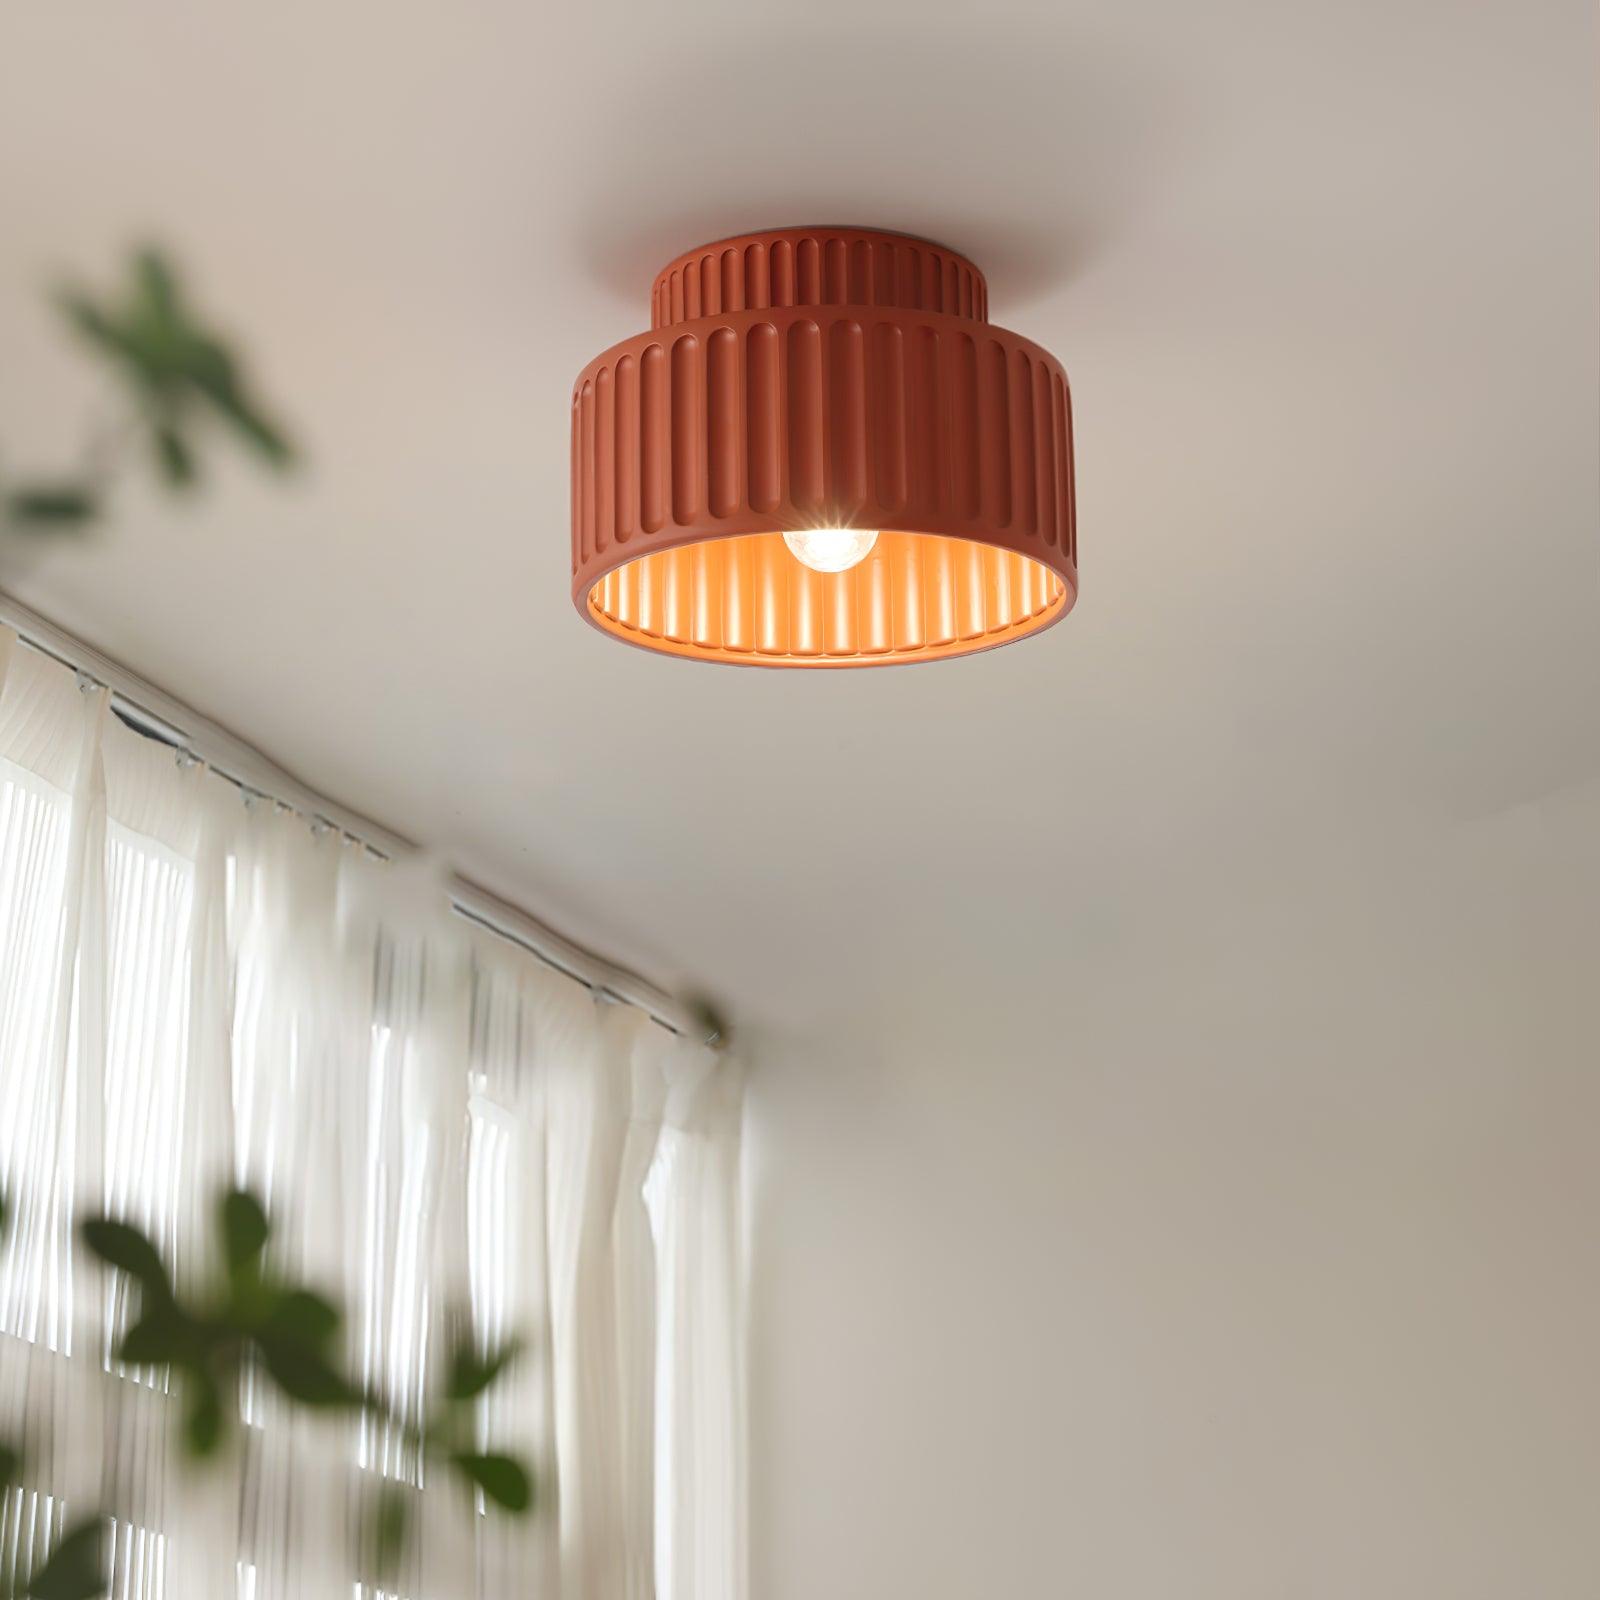 Clever Ceiling Light Choices: 8 Affordable Fixtures for Every Room